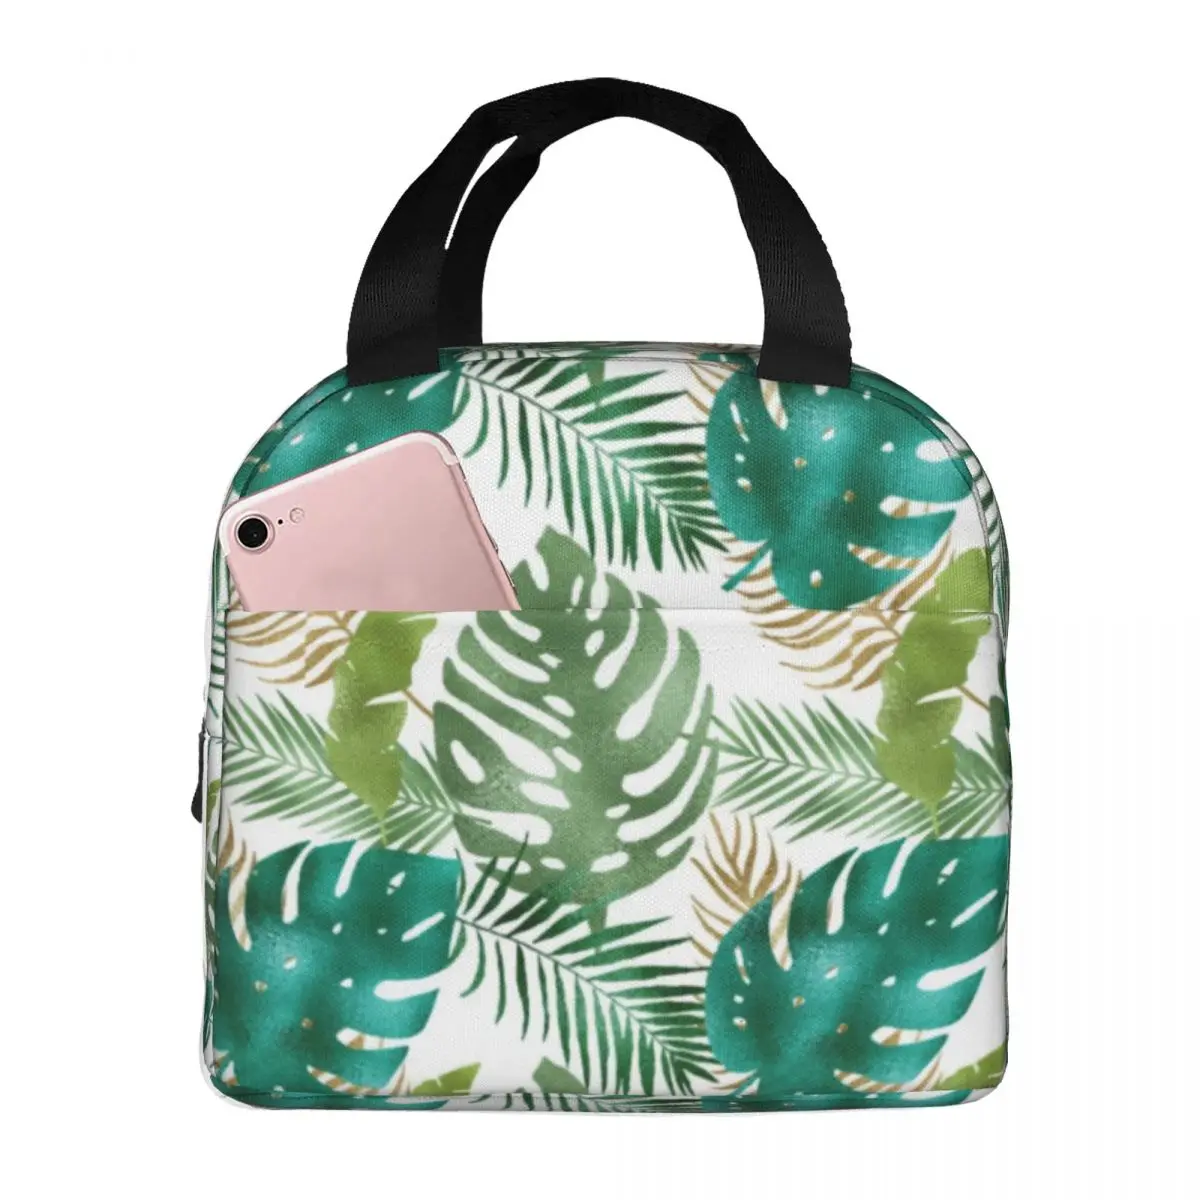 

Variety Metallic Colors Lunch Bag with Handle Green Palm Leaf Meal Cooler Bag Reusable Zipper Travel Thermal Bag